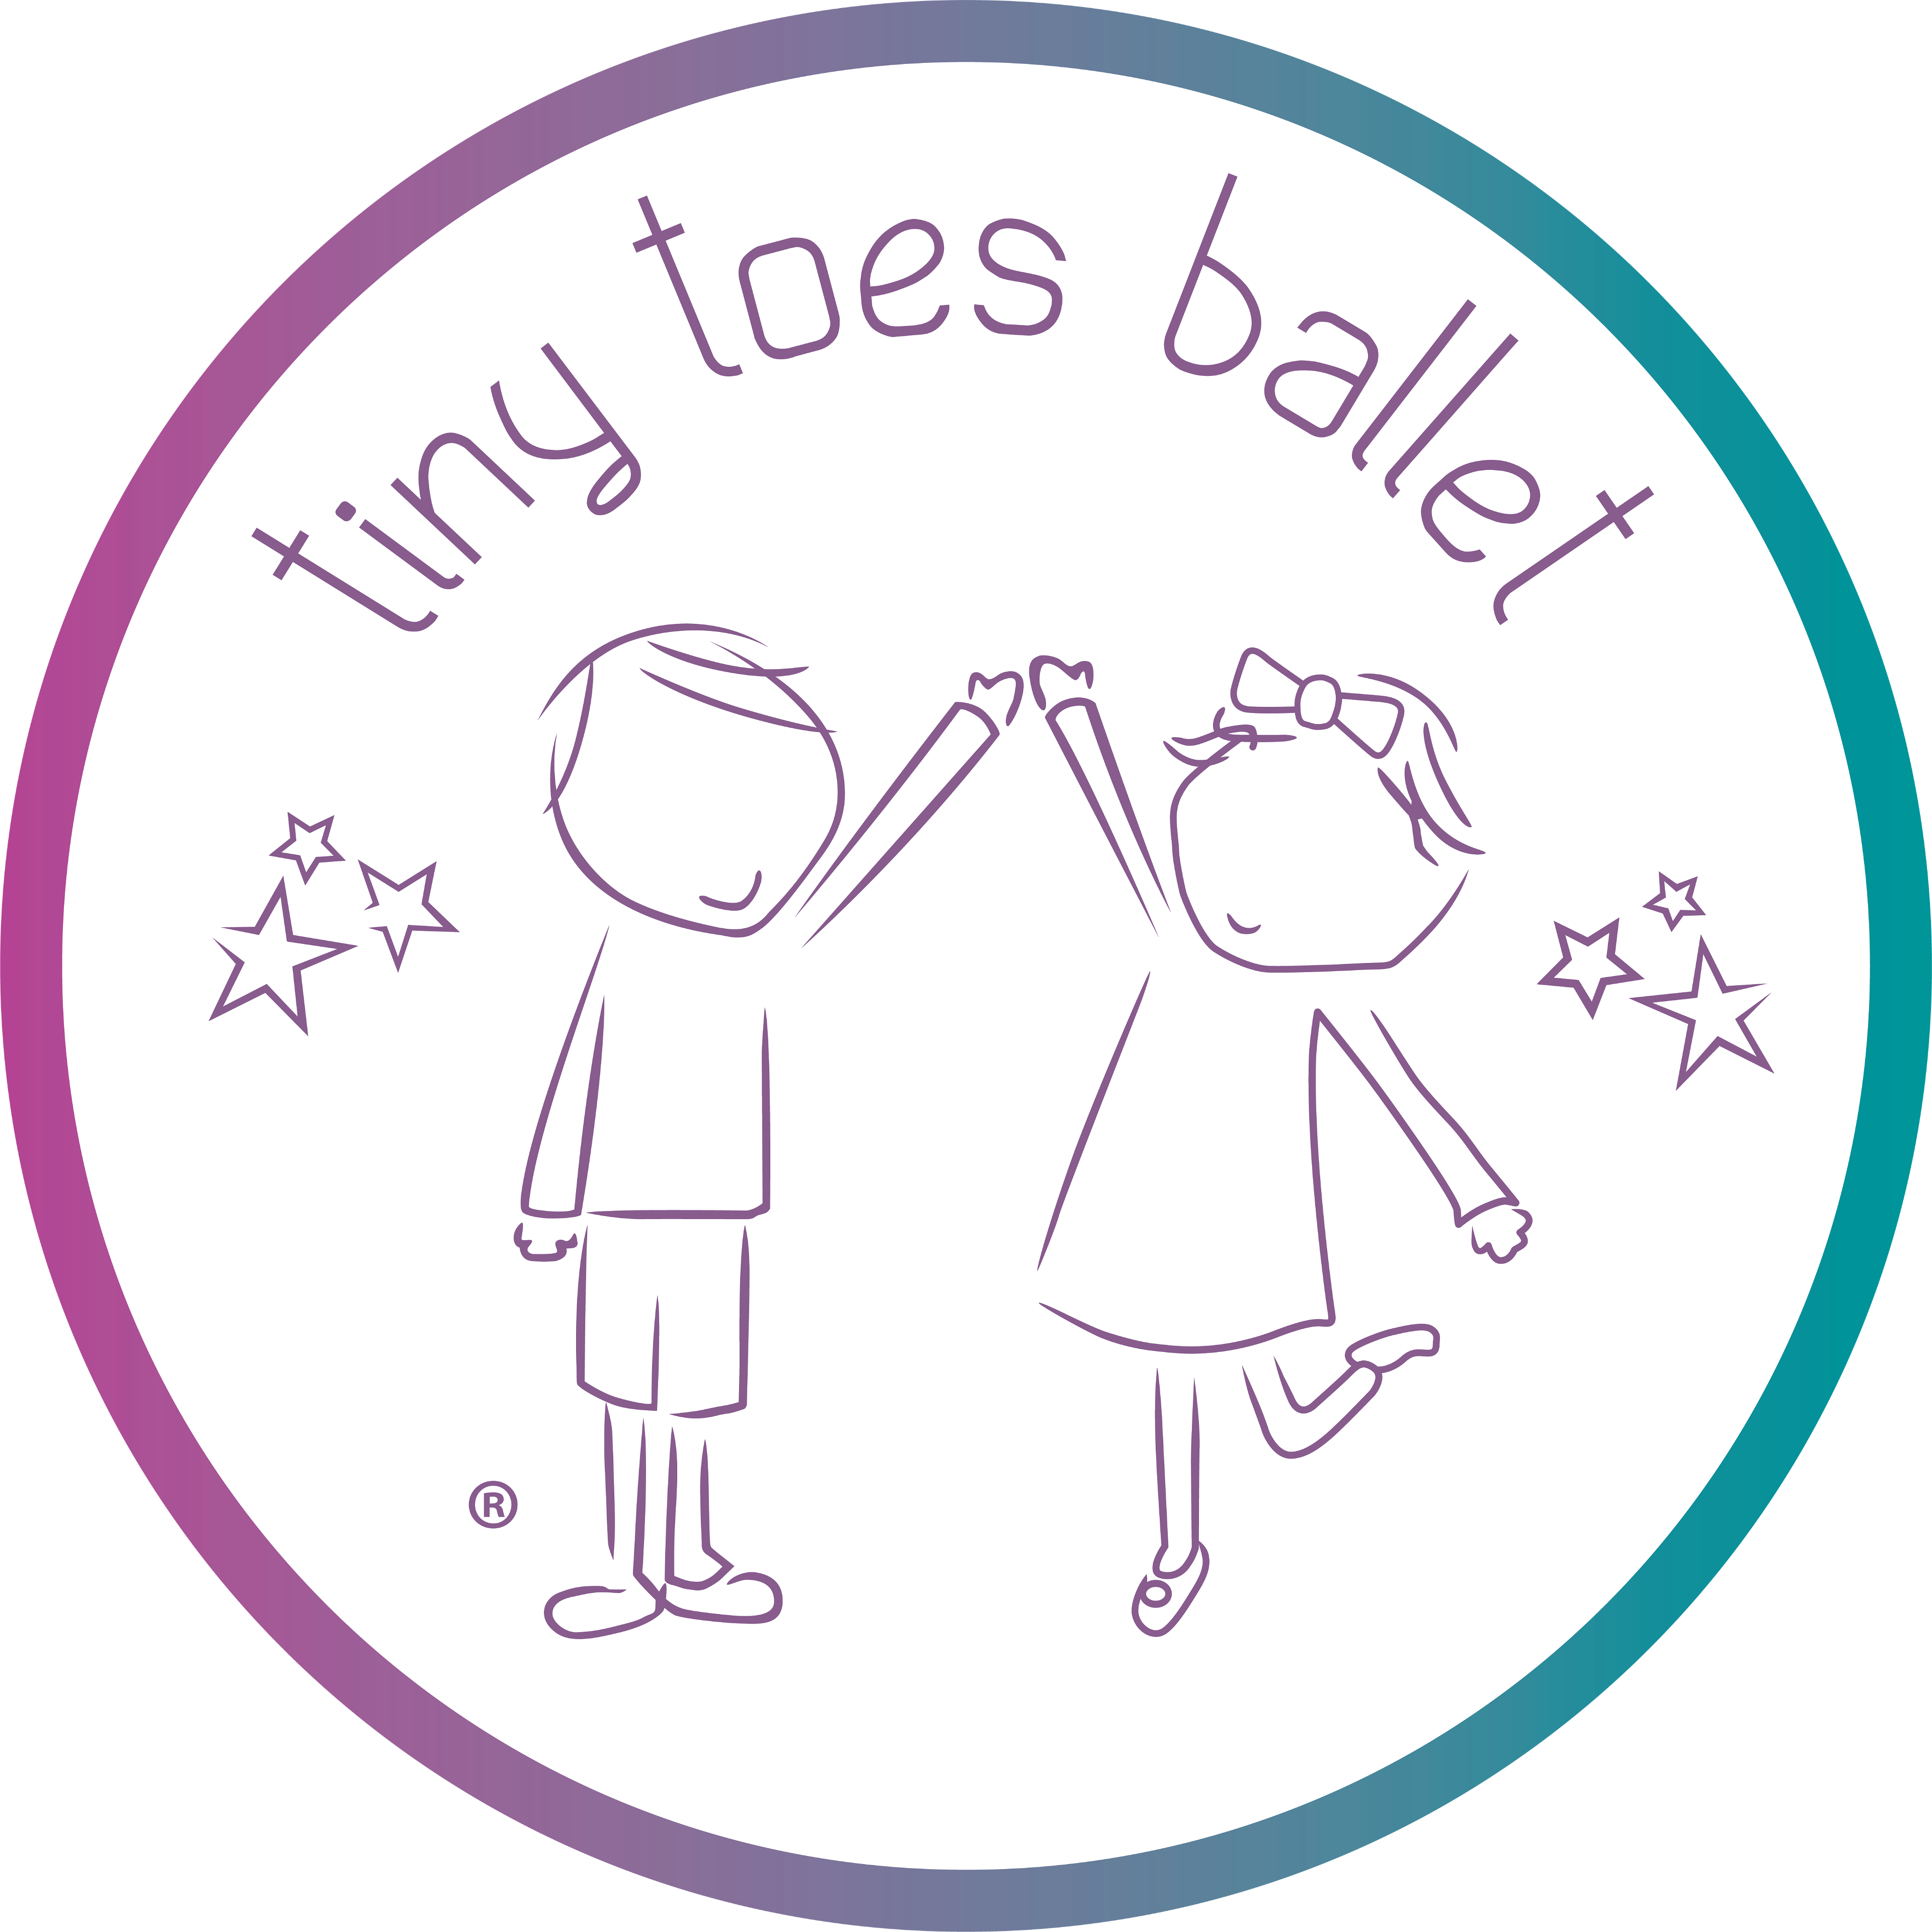 Tiny toes ballet Northamptonshire and Oxfordshire - Brackley, Tuesdays